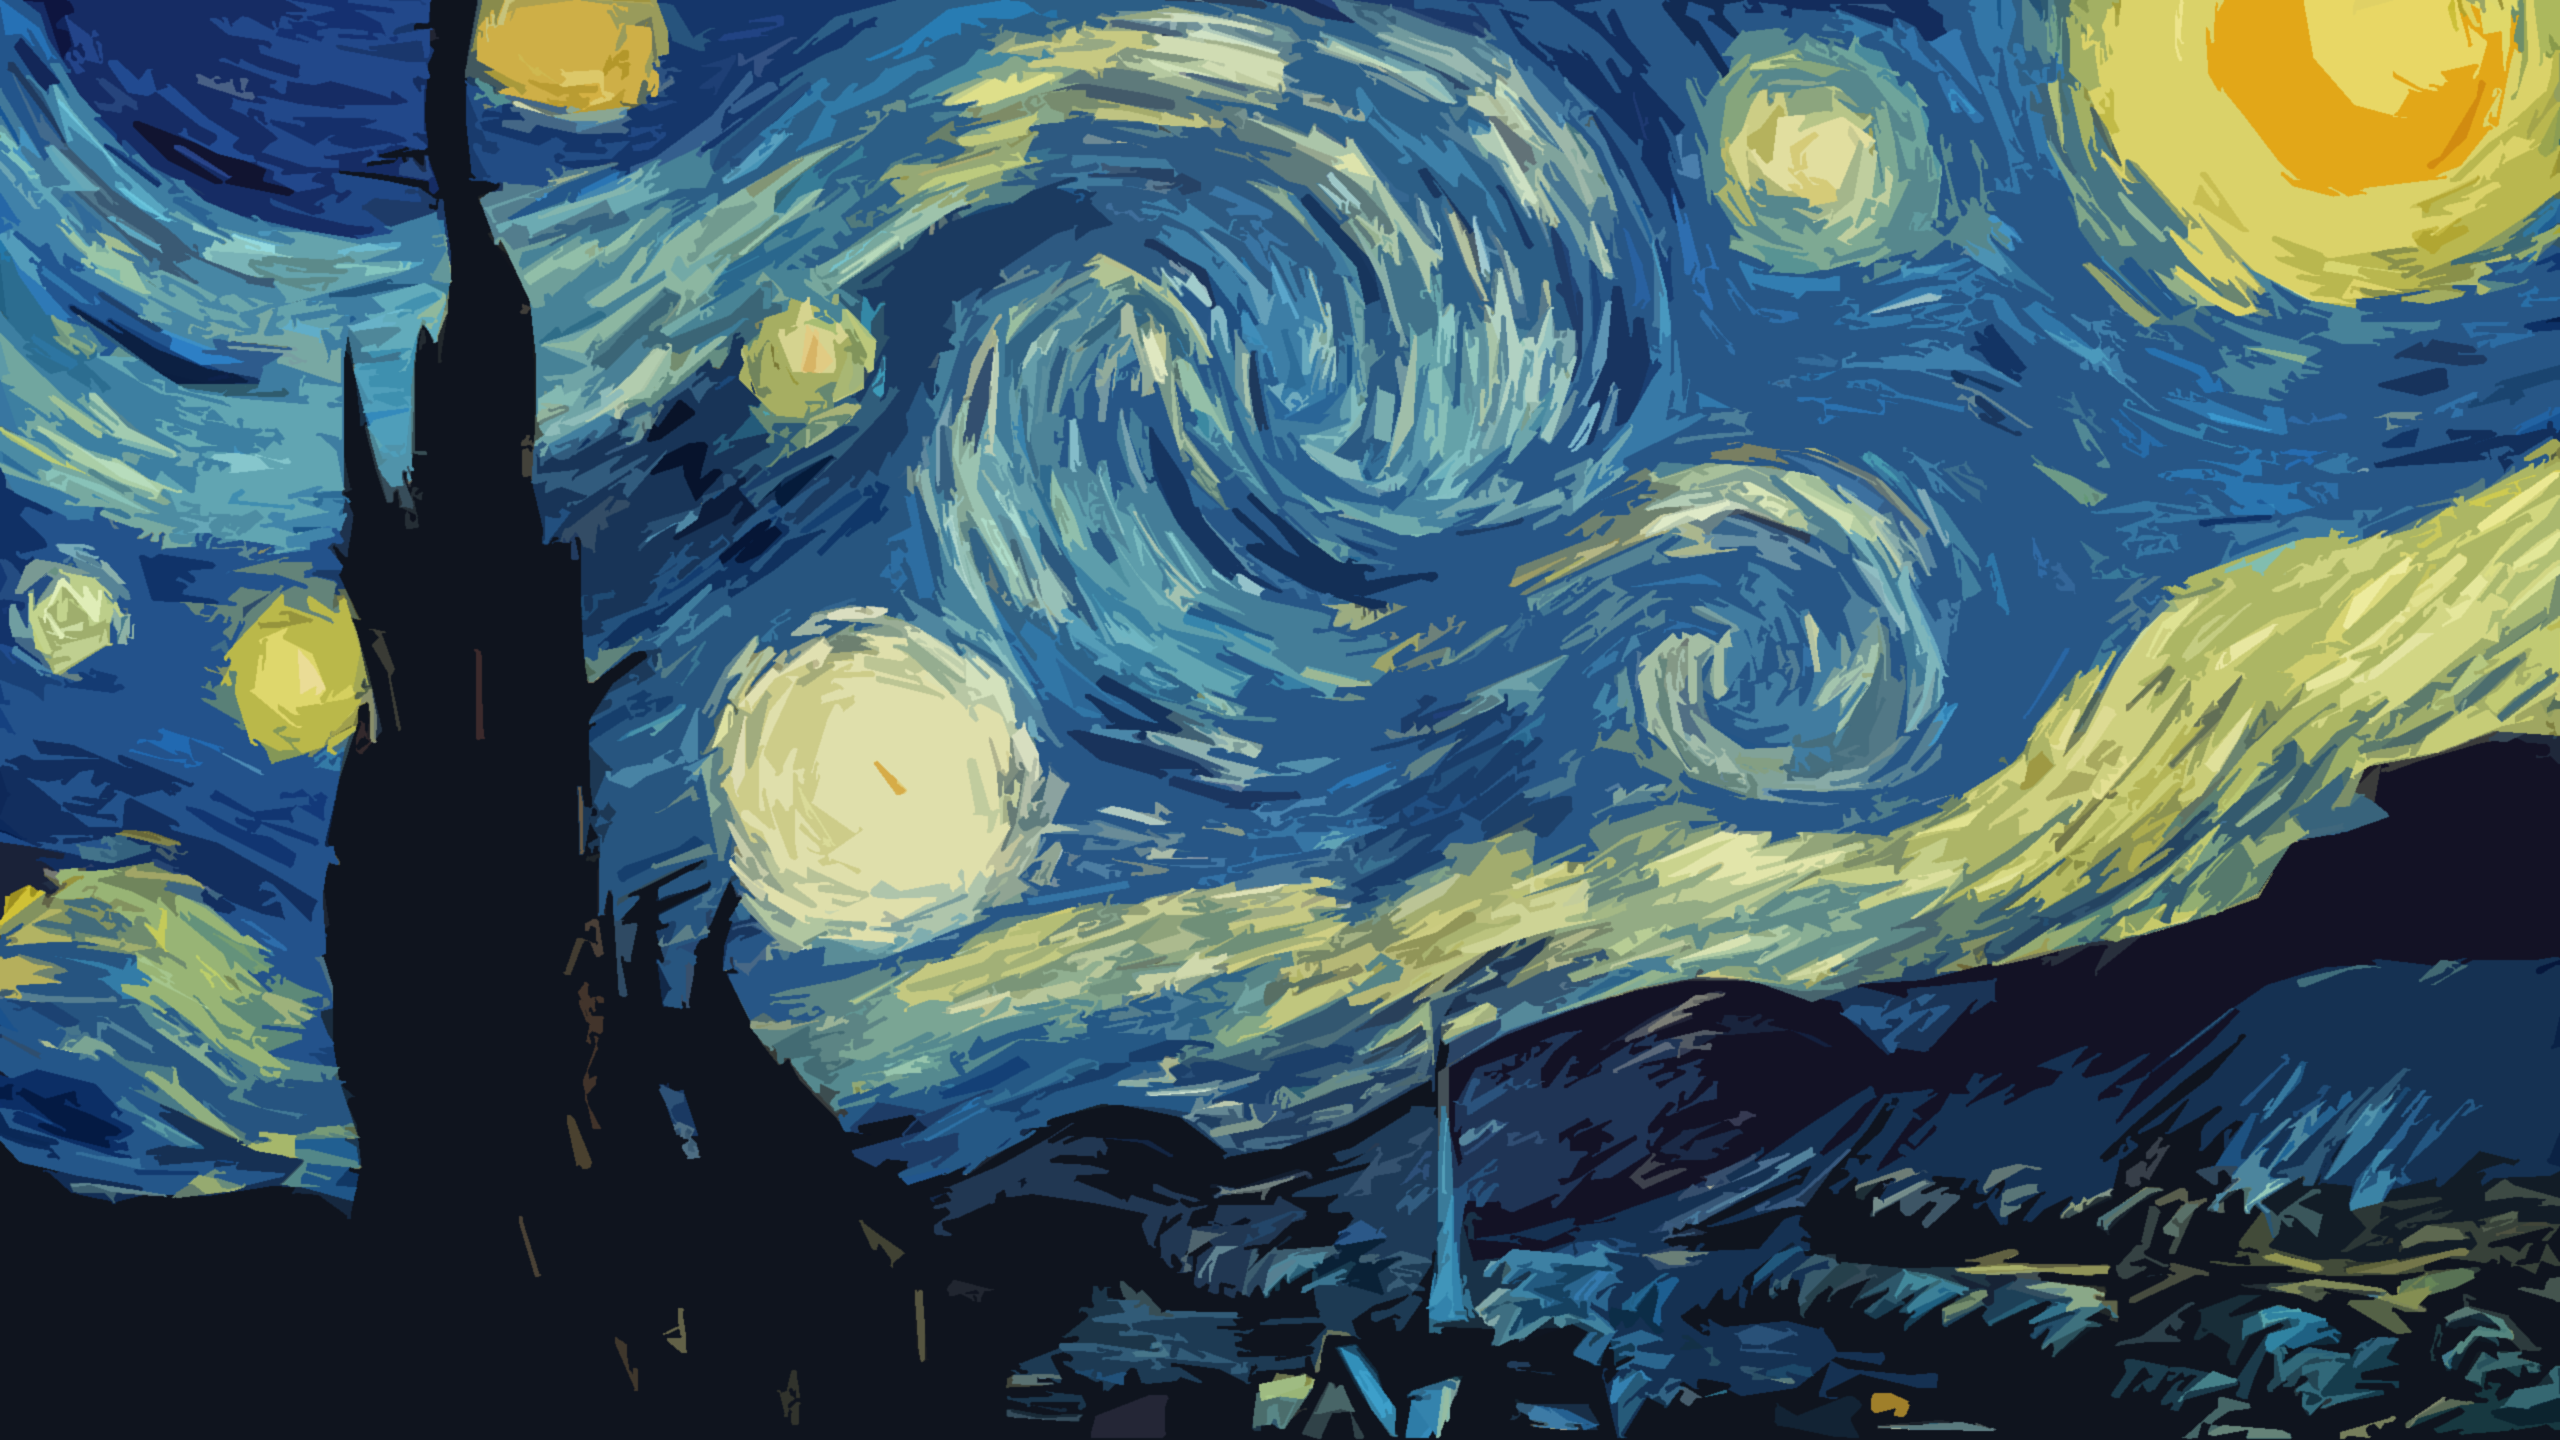 Painting Vincent Van Gogh Abstract The Starry Night Wallpaper   Resolution2560x1440  ID373108  wallhacom